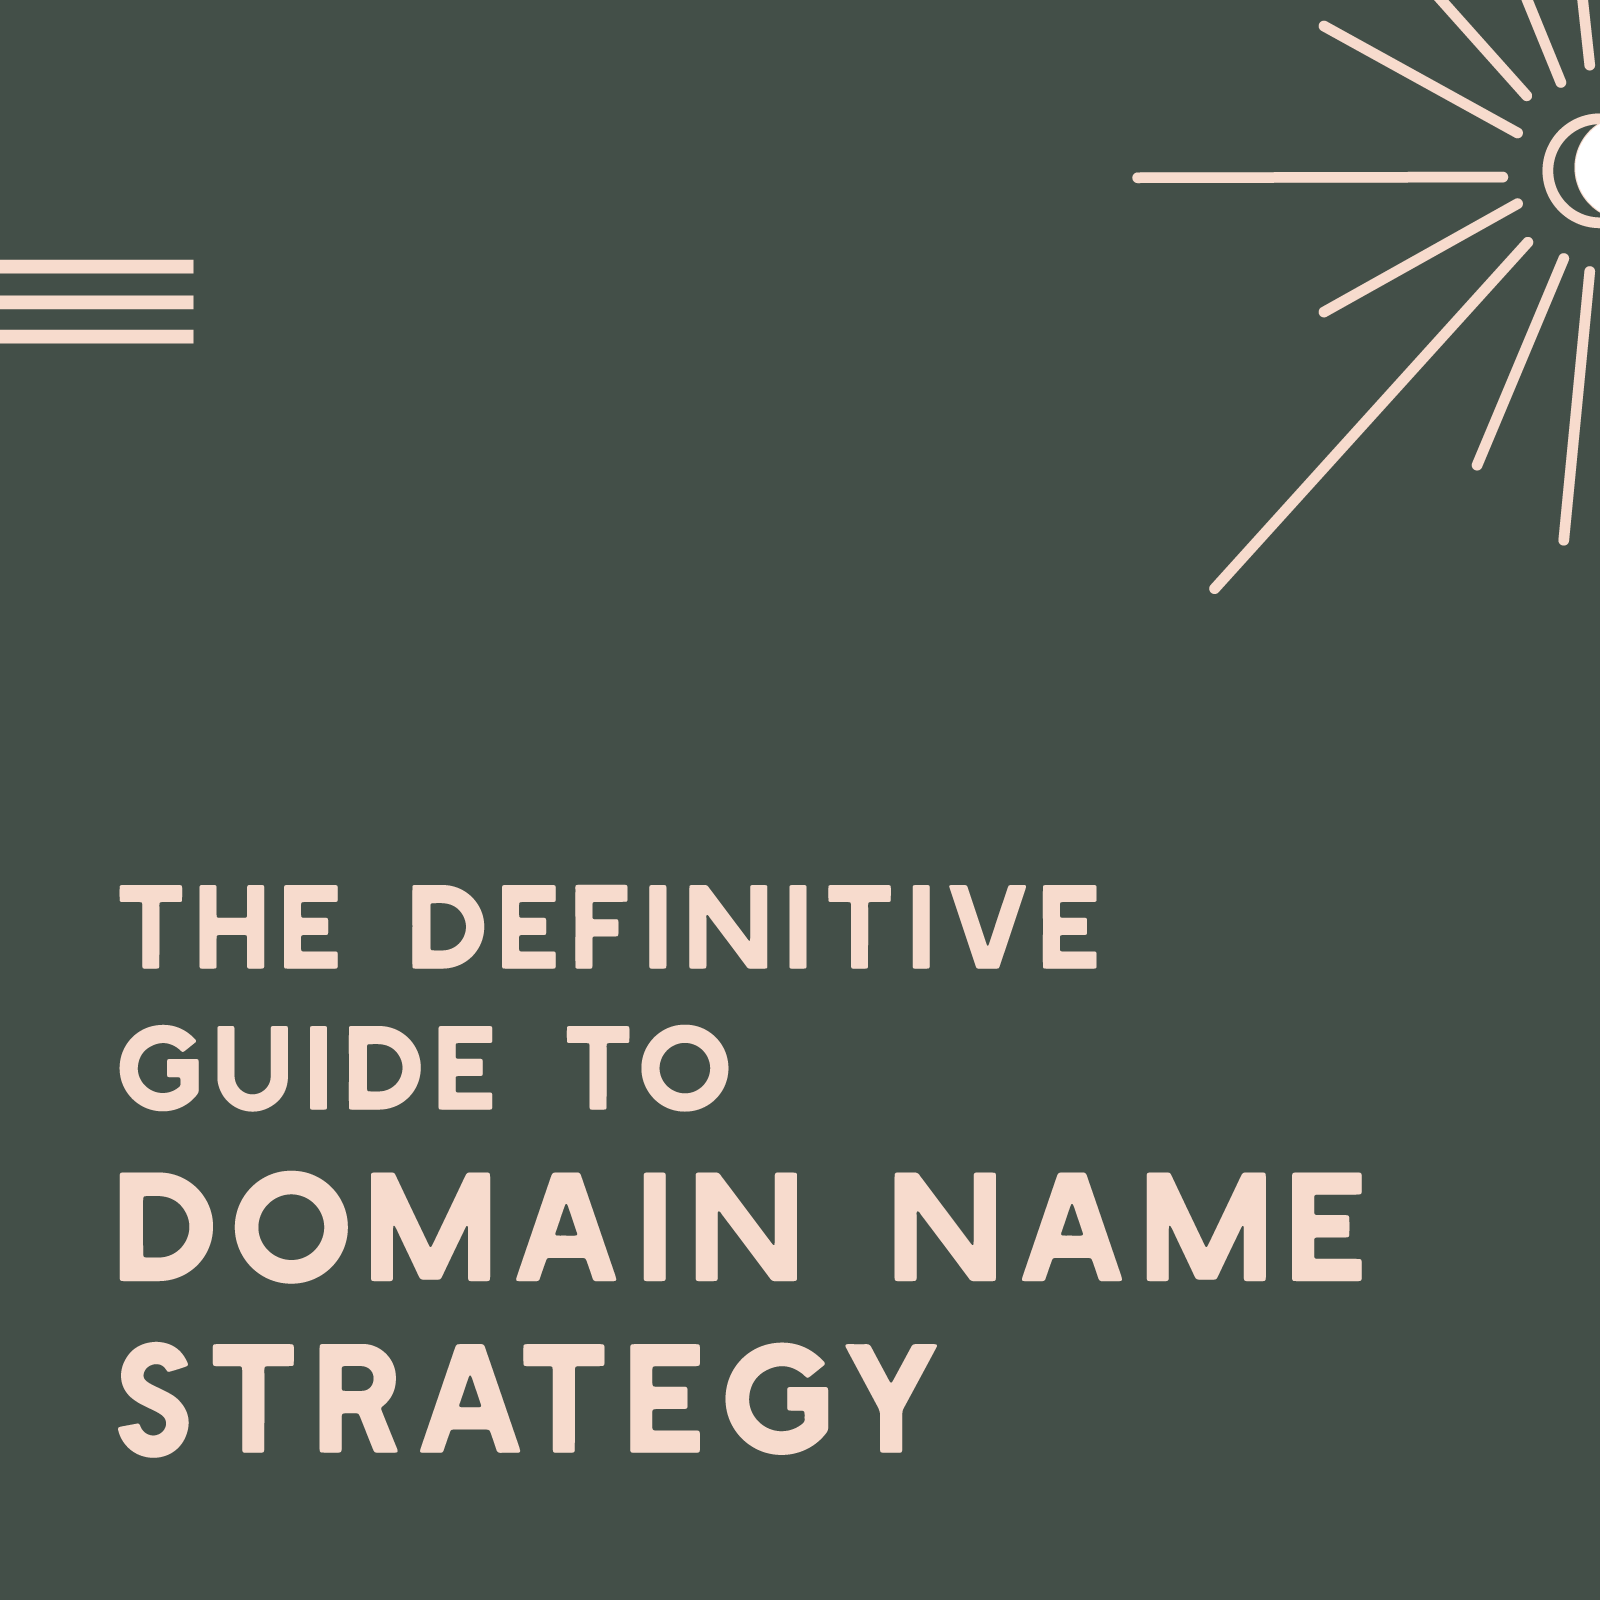 The Definitive Guide To Domain Name Strategy